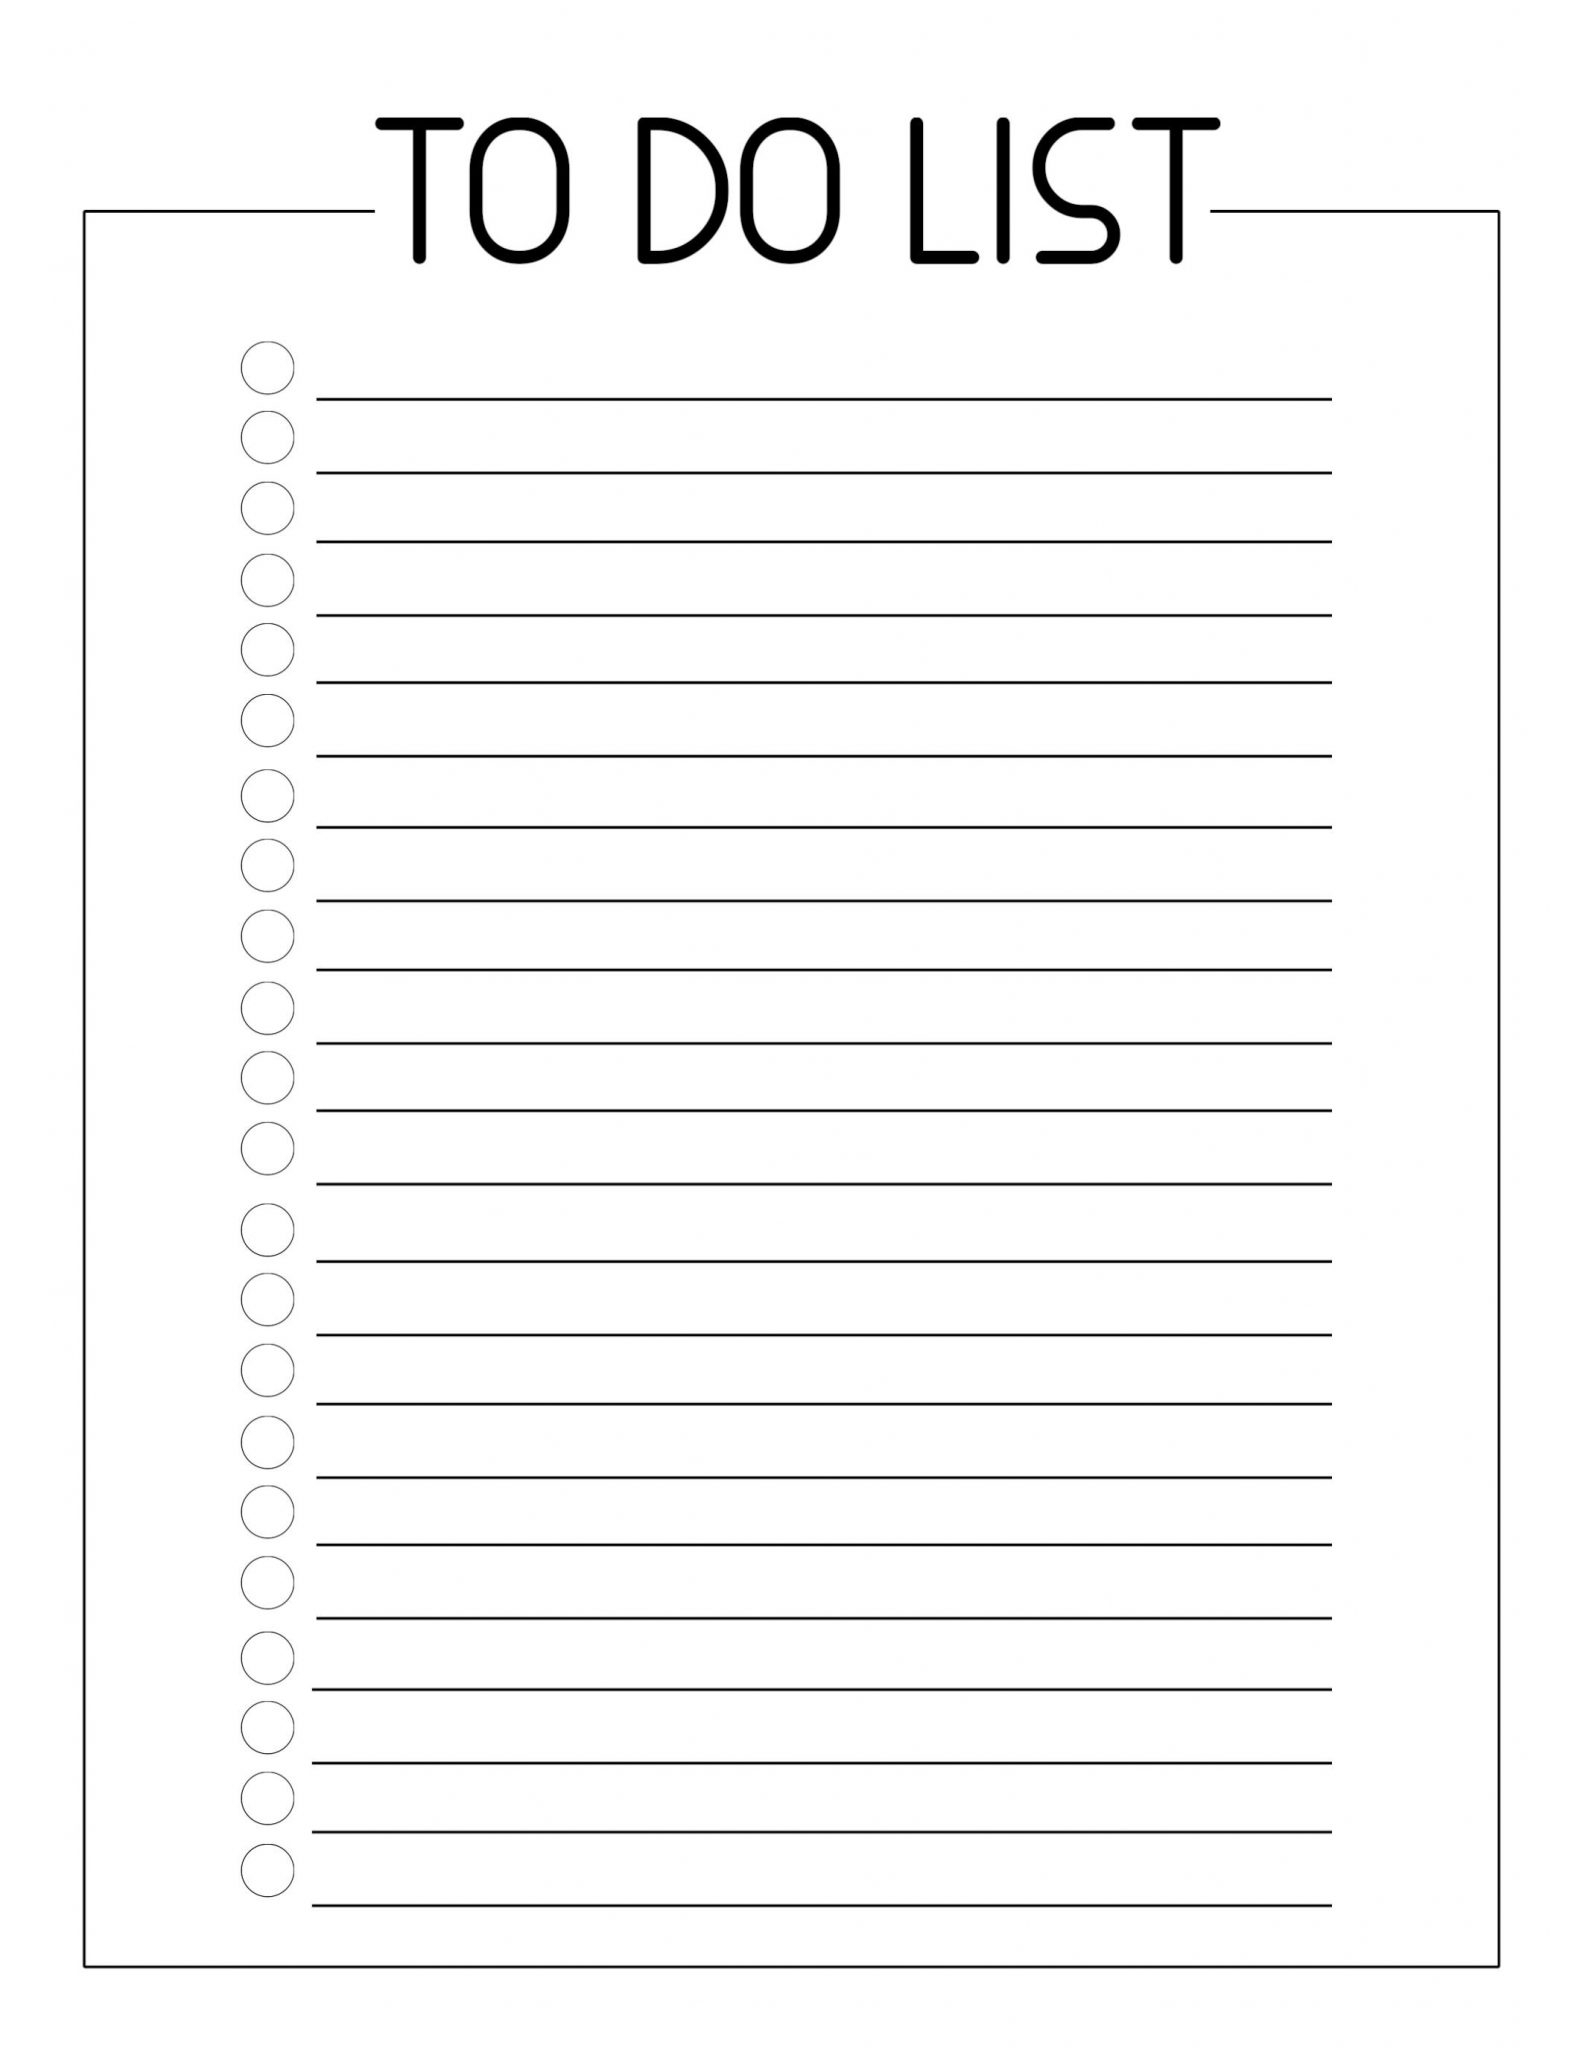 Printable Blank Numbered List Up To 31 :Free Calendar with Blank 31 Day Calendar Template